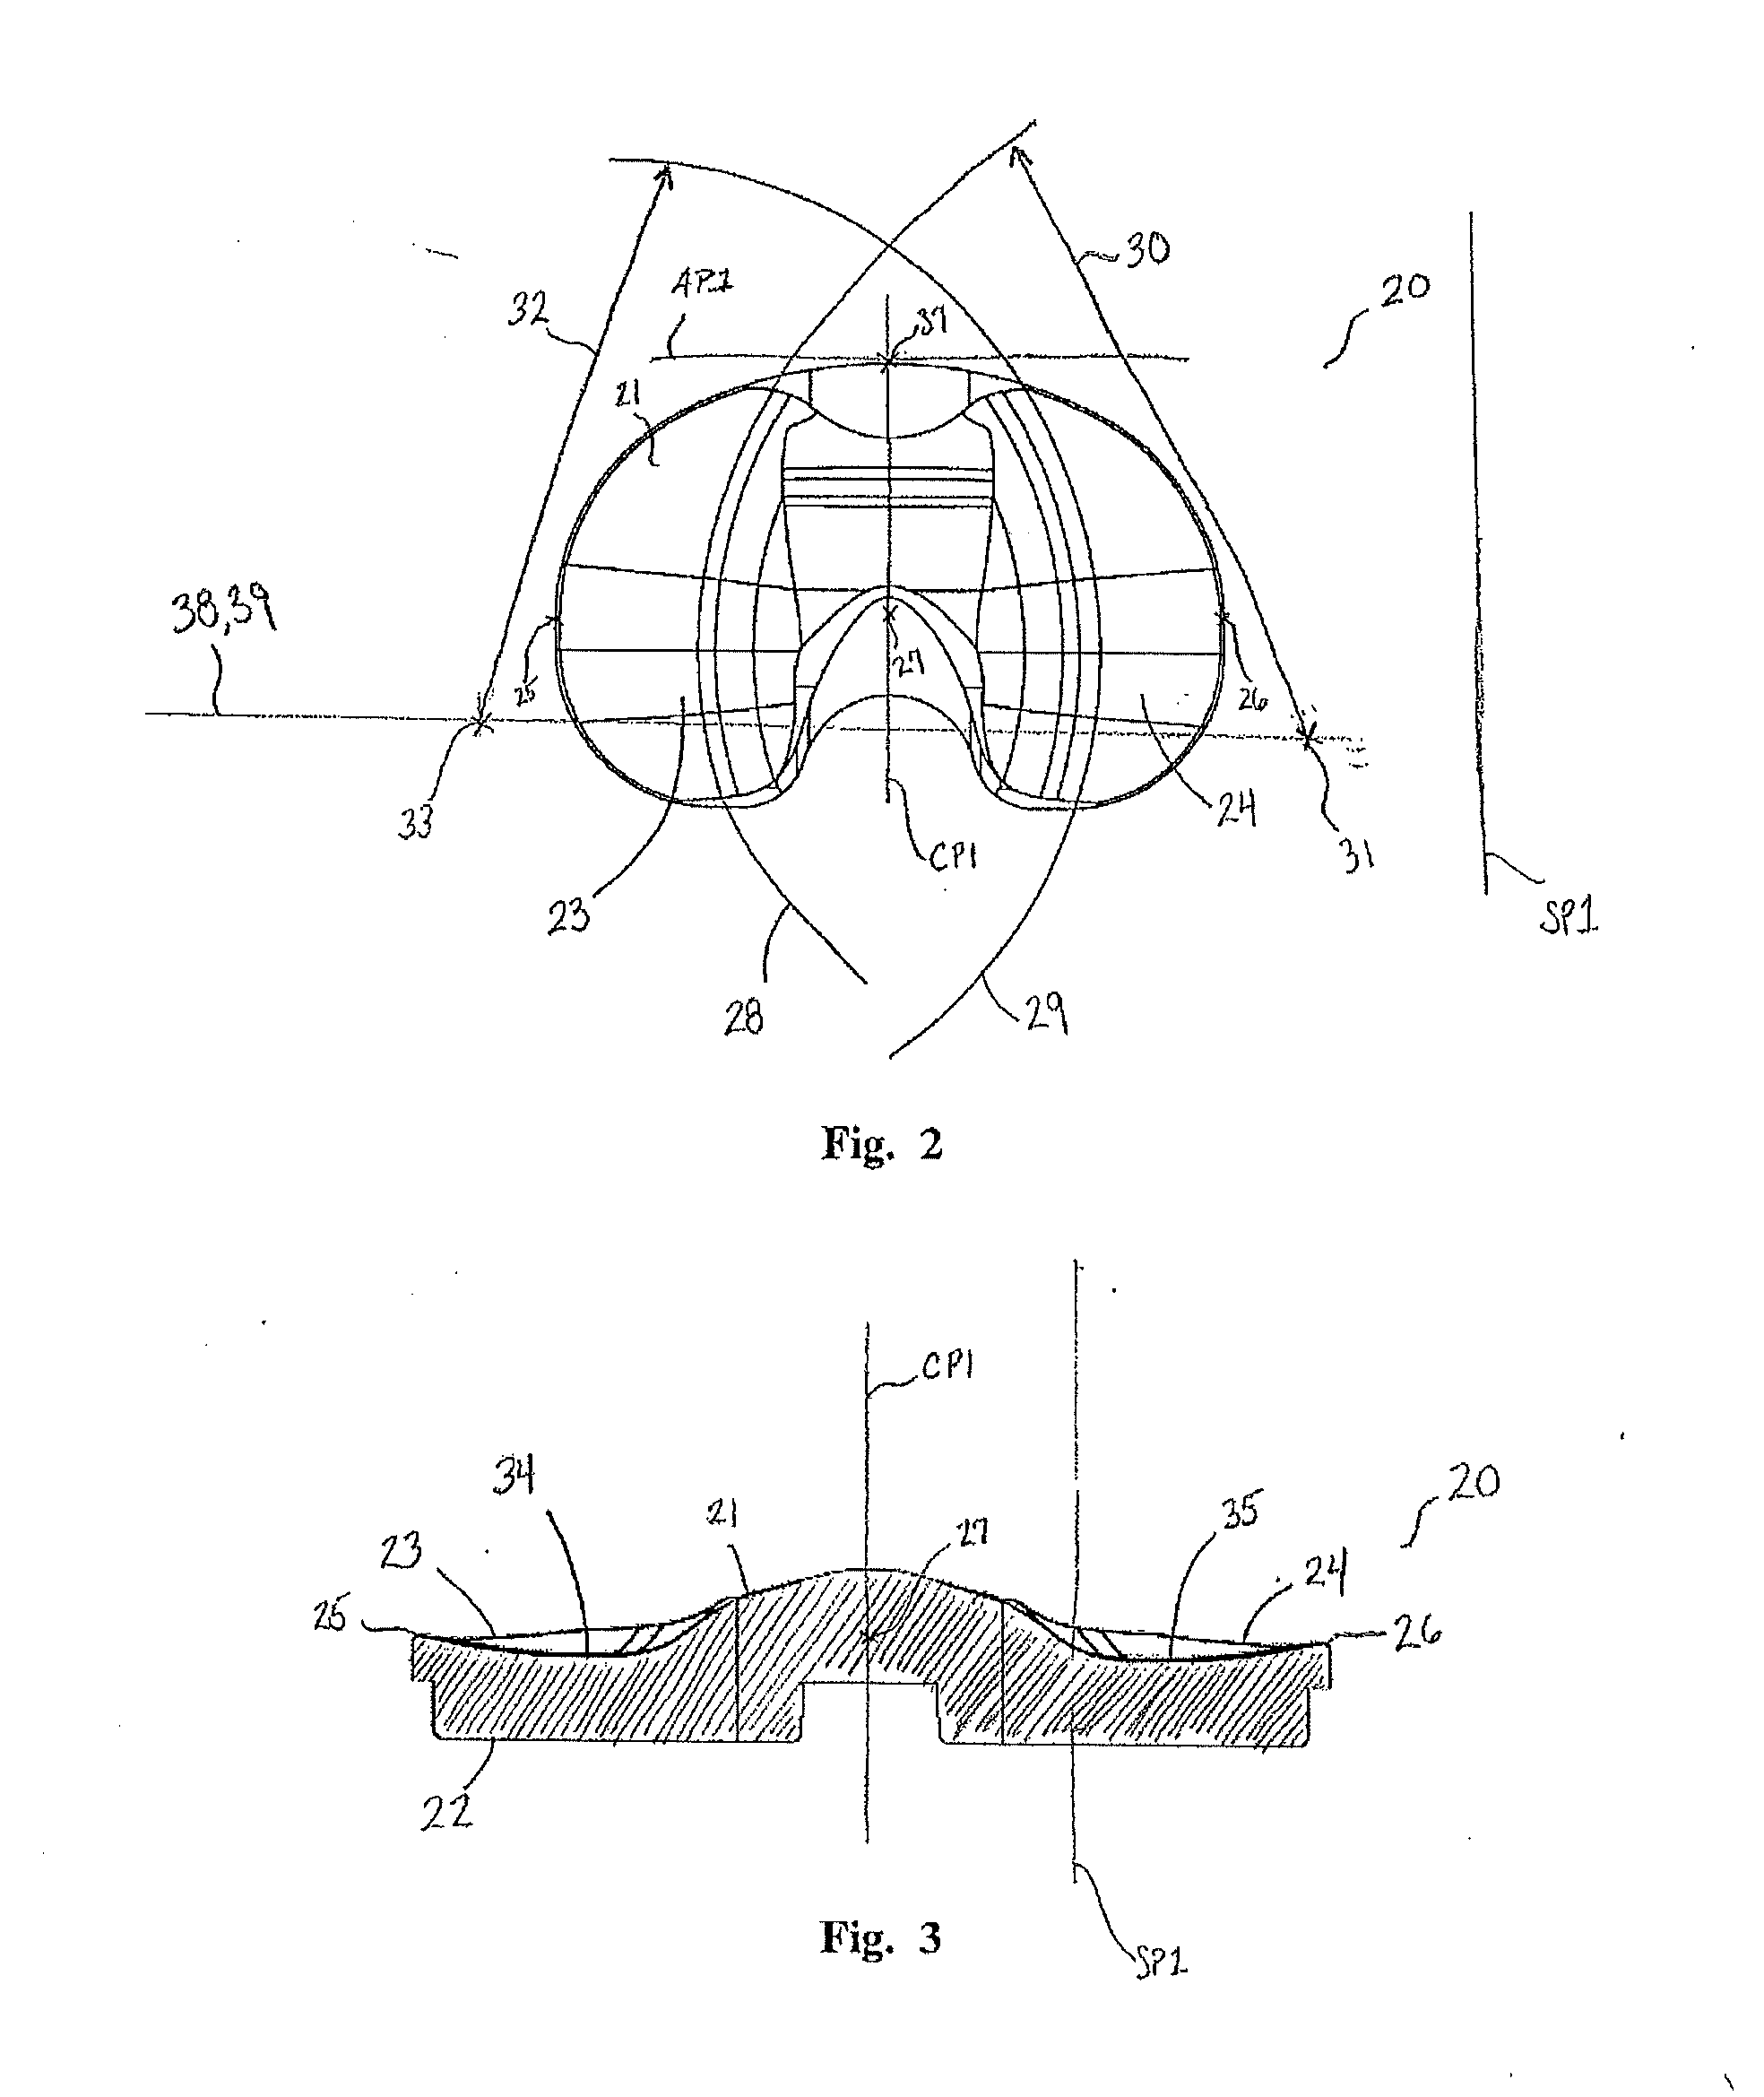 Prosthetic implant and associated instruments